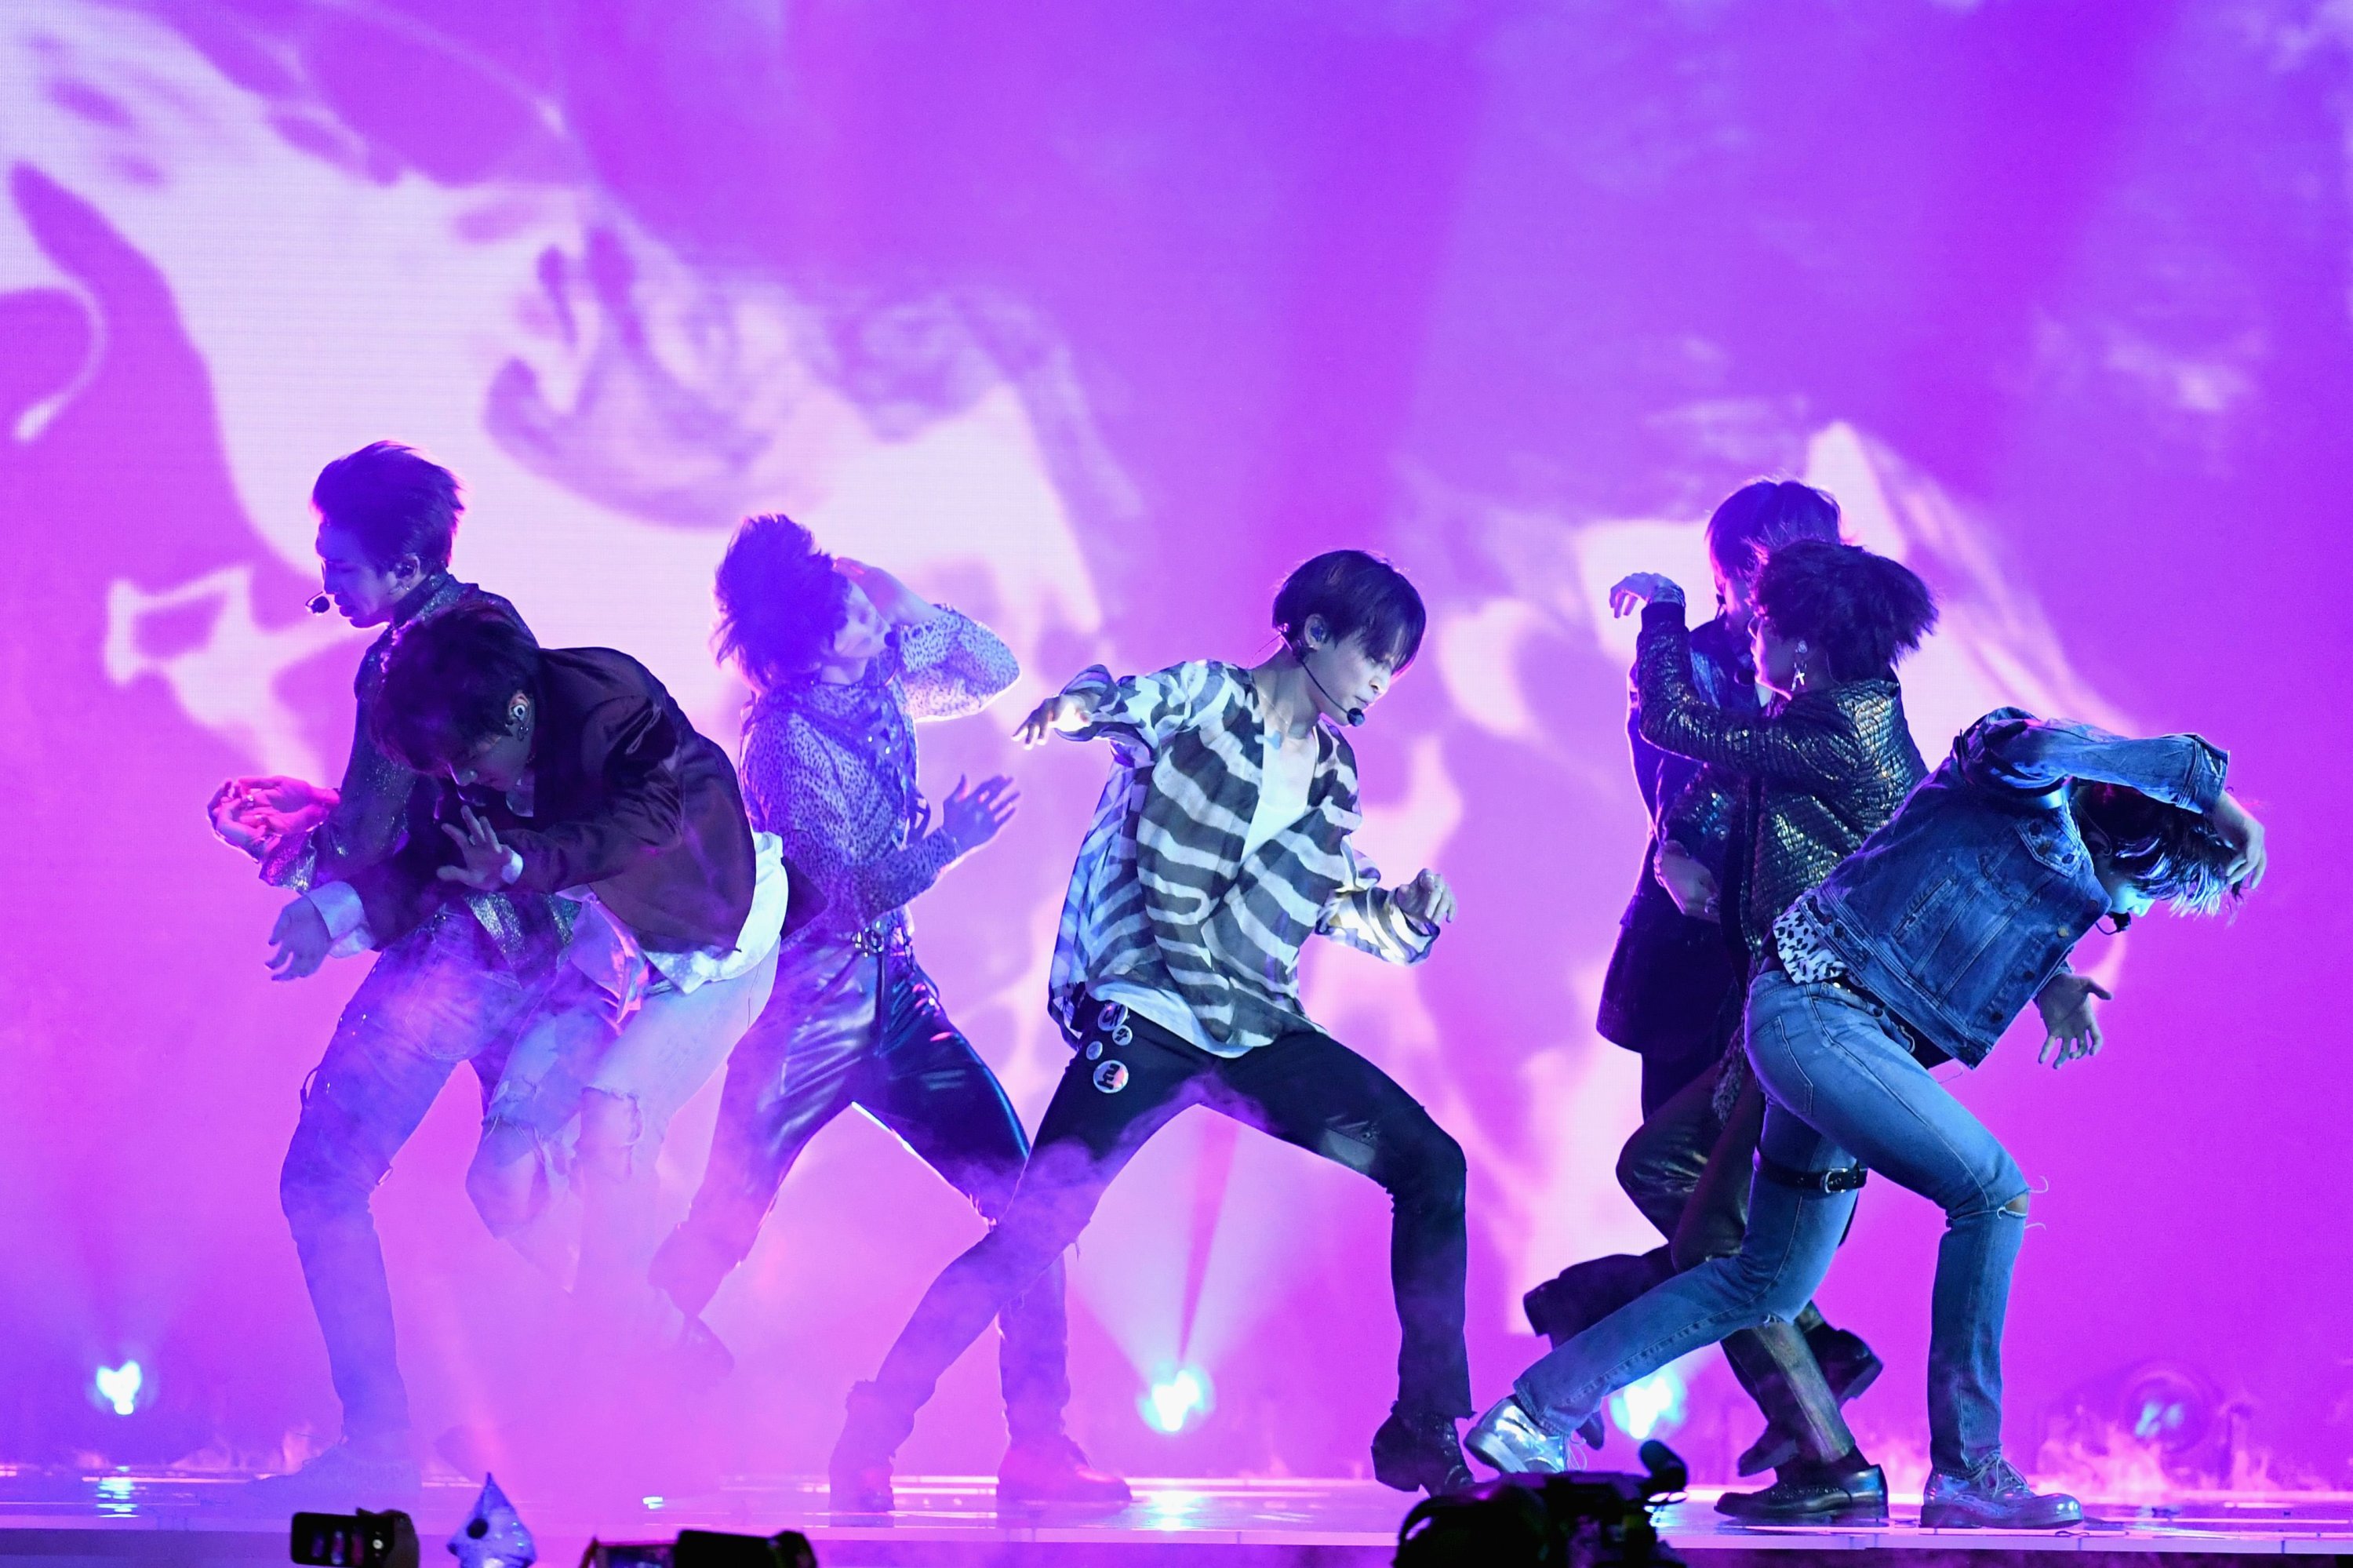 Musical group BTS perfroms onstage during the 2018 Billboard Music Awards at MGM Grand Garden Arena on May 20, 2018 in Las Vegas, Nevada. (AFP)